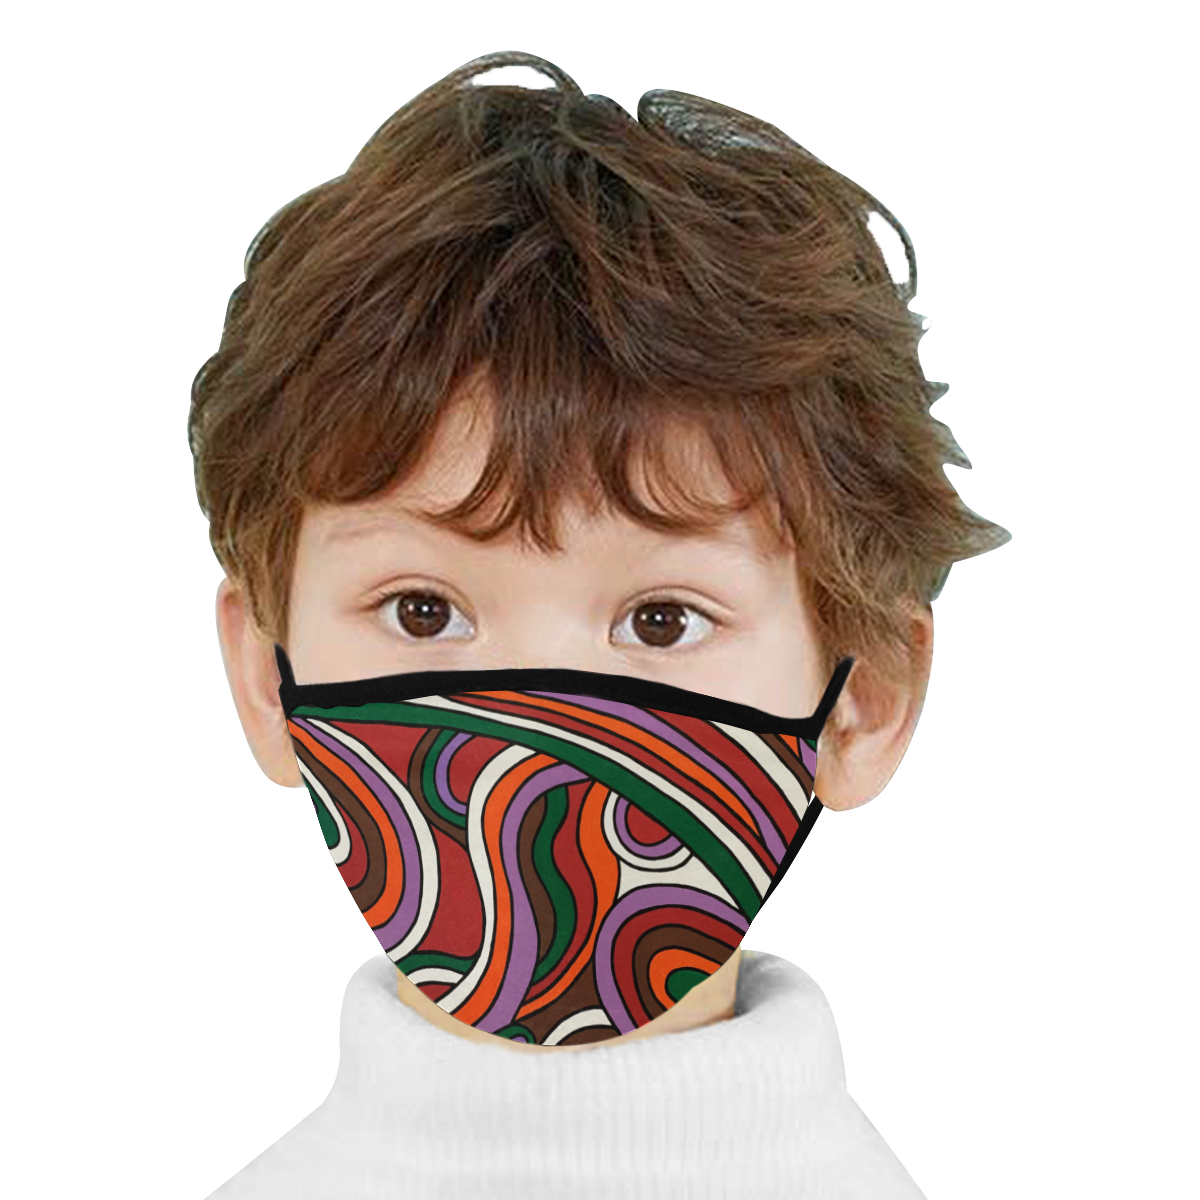 Vulnerable Mouth Mask